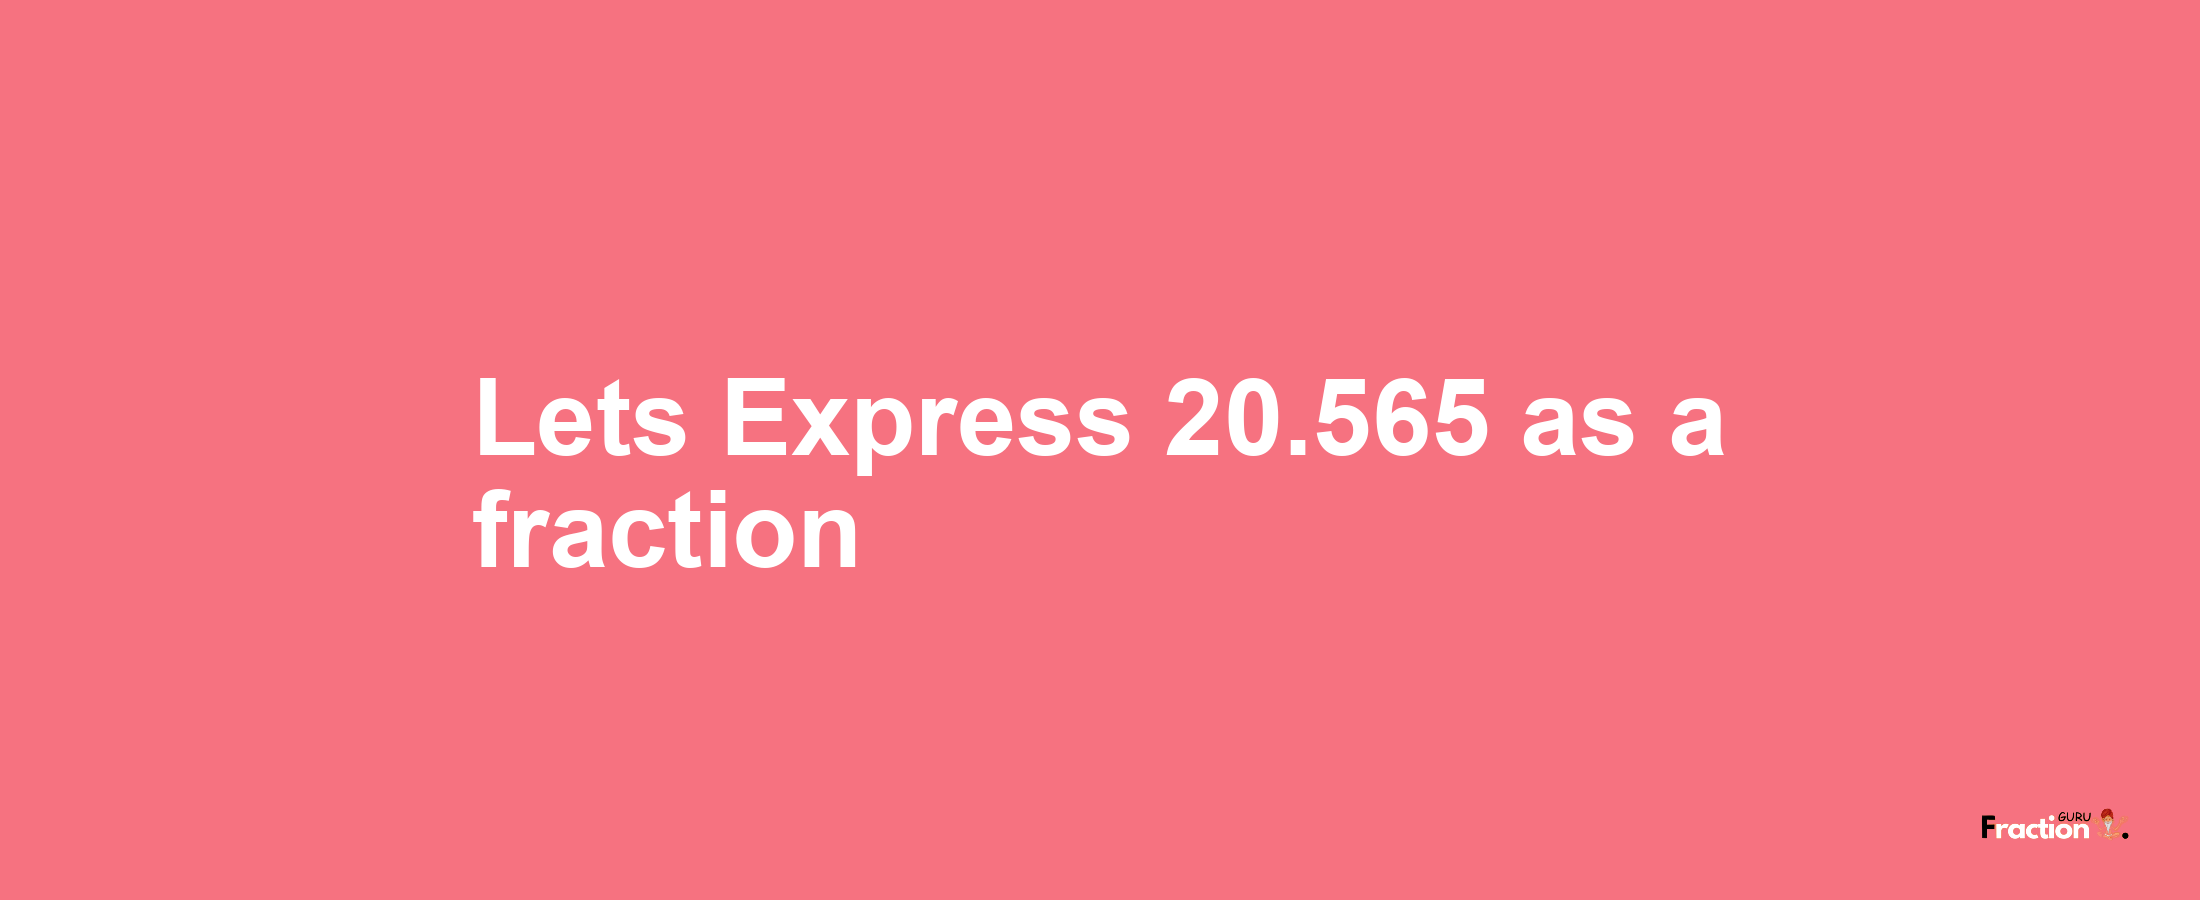 Lets Express 20.565 as afraction